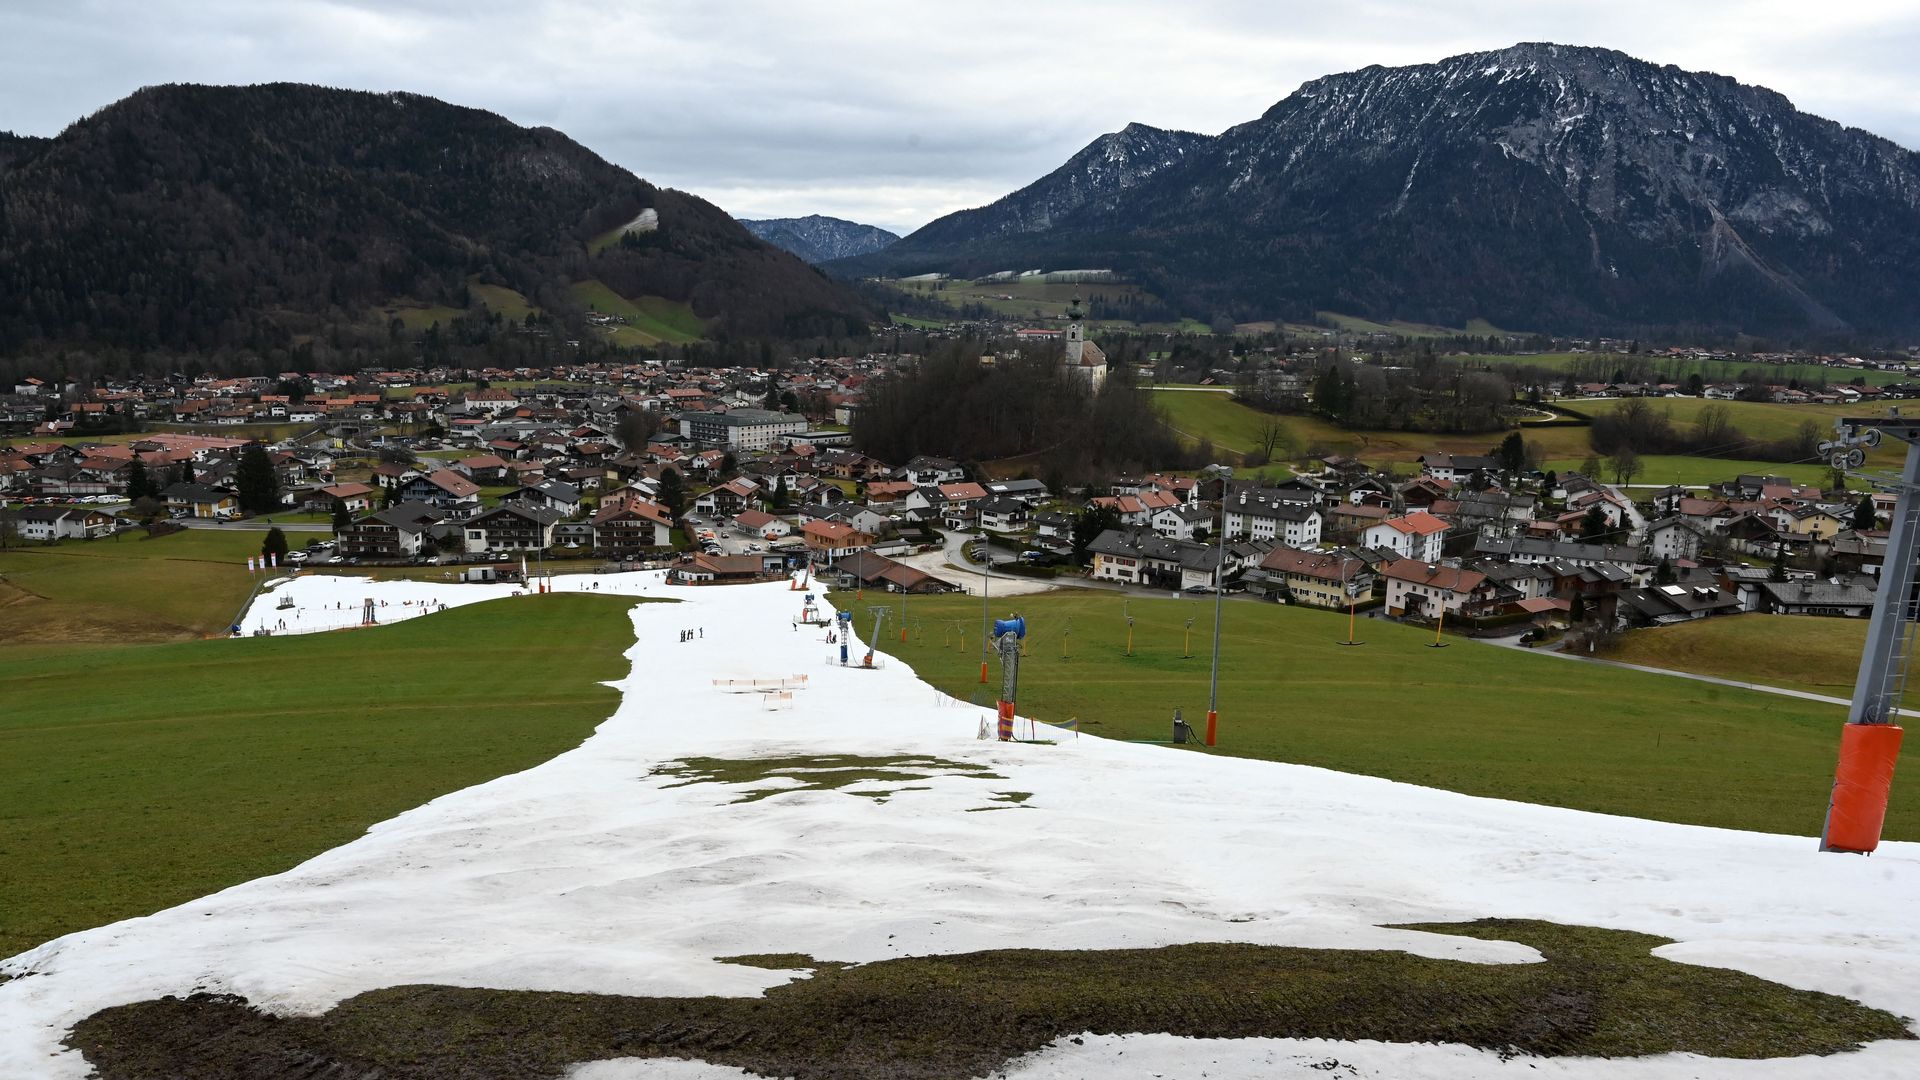 A patchy artificial snow hill is pictured near the Bavarian village of Ruhpolding, southern Germany, on January 11, 2023